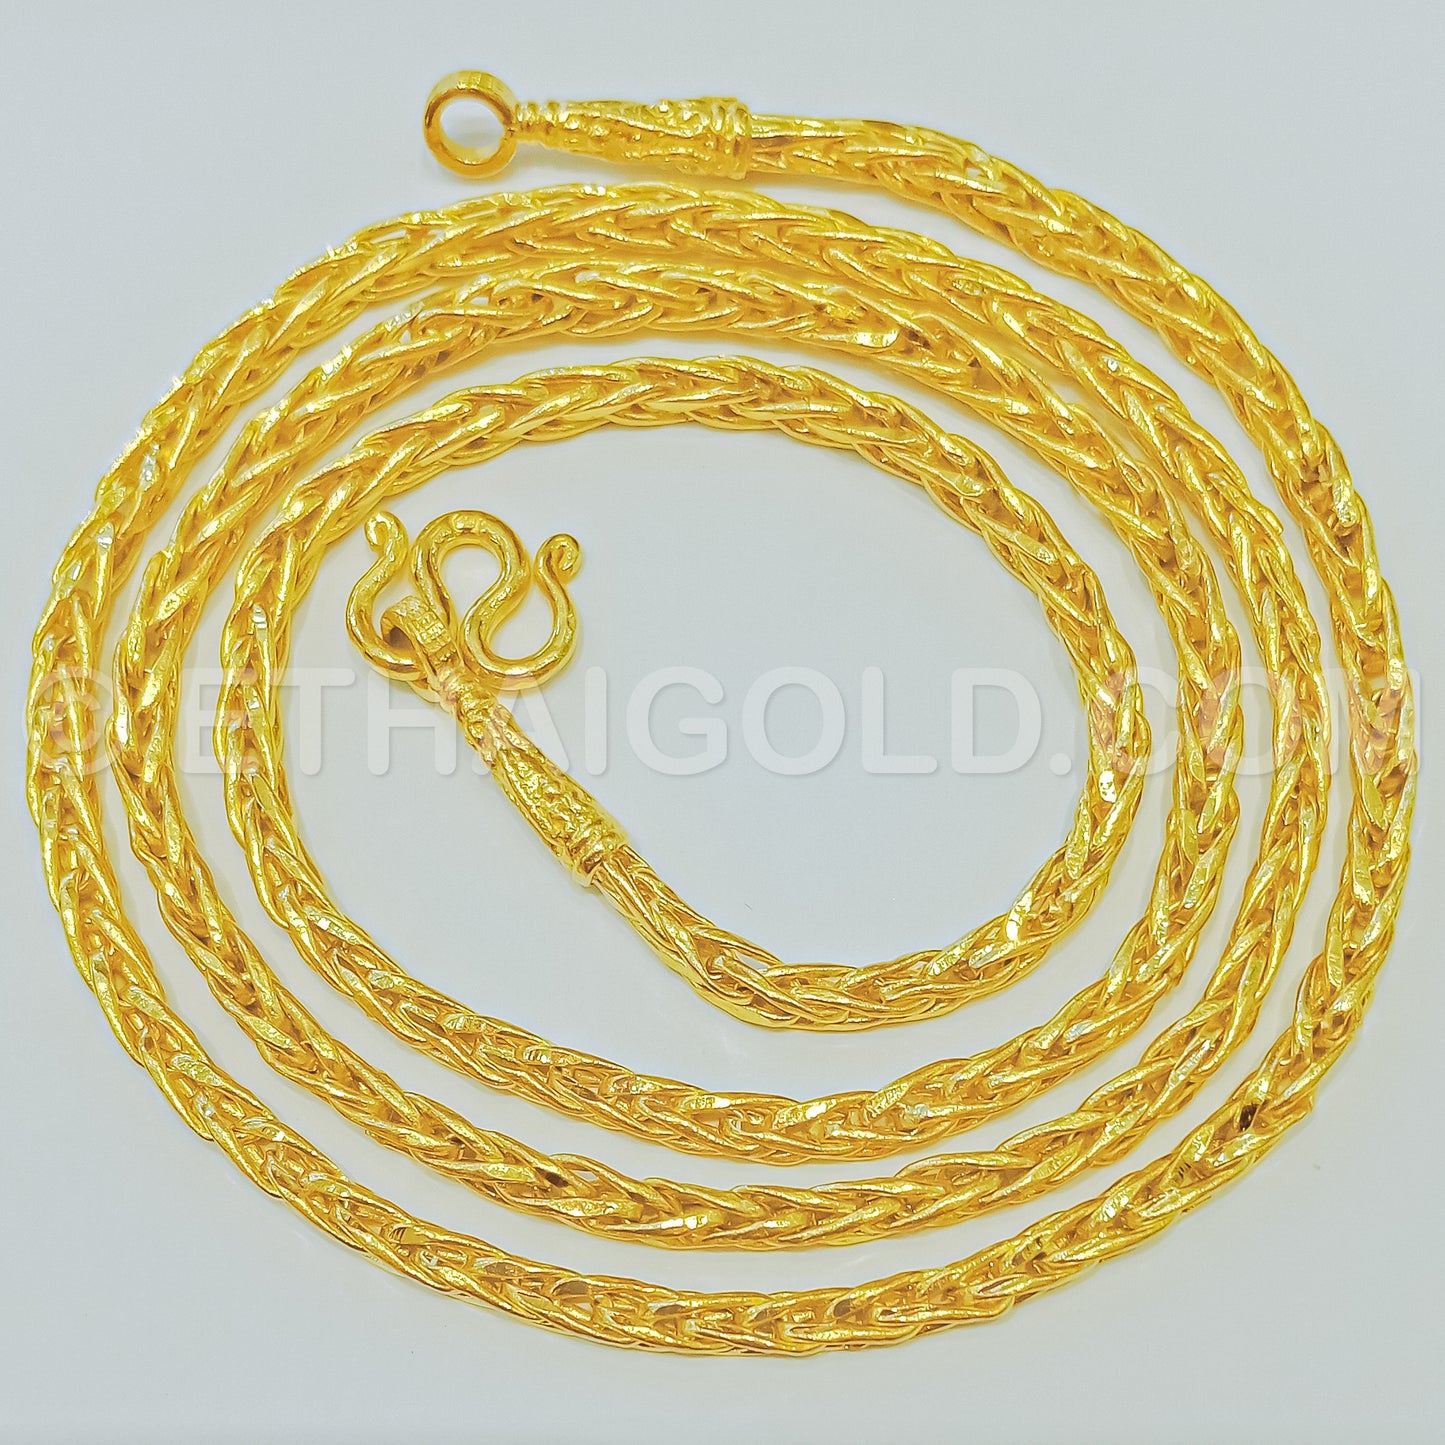 1 BAHT POLISHED DIAMOND-CUT HOLLOW SQUARE WHEAT CHAIN NECKLACE IN 23K GOLD (ID: N1401B)